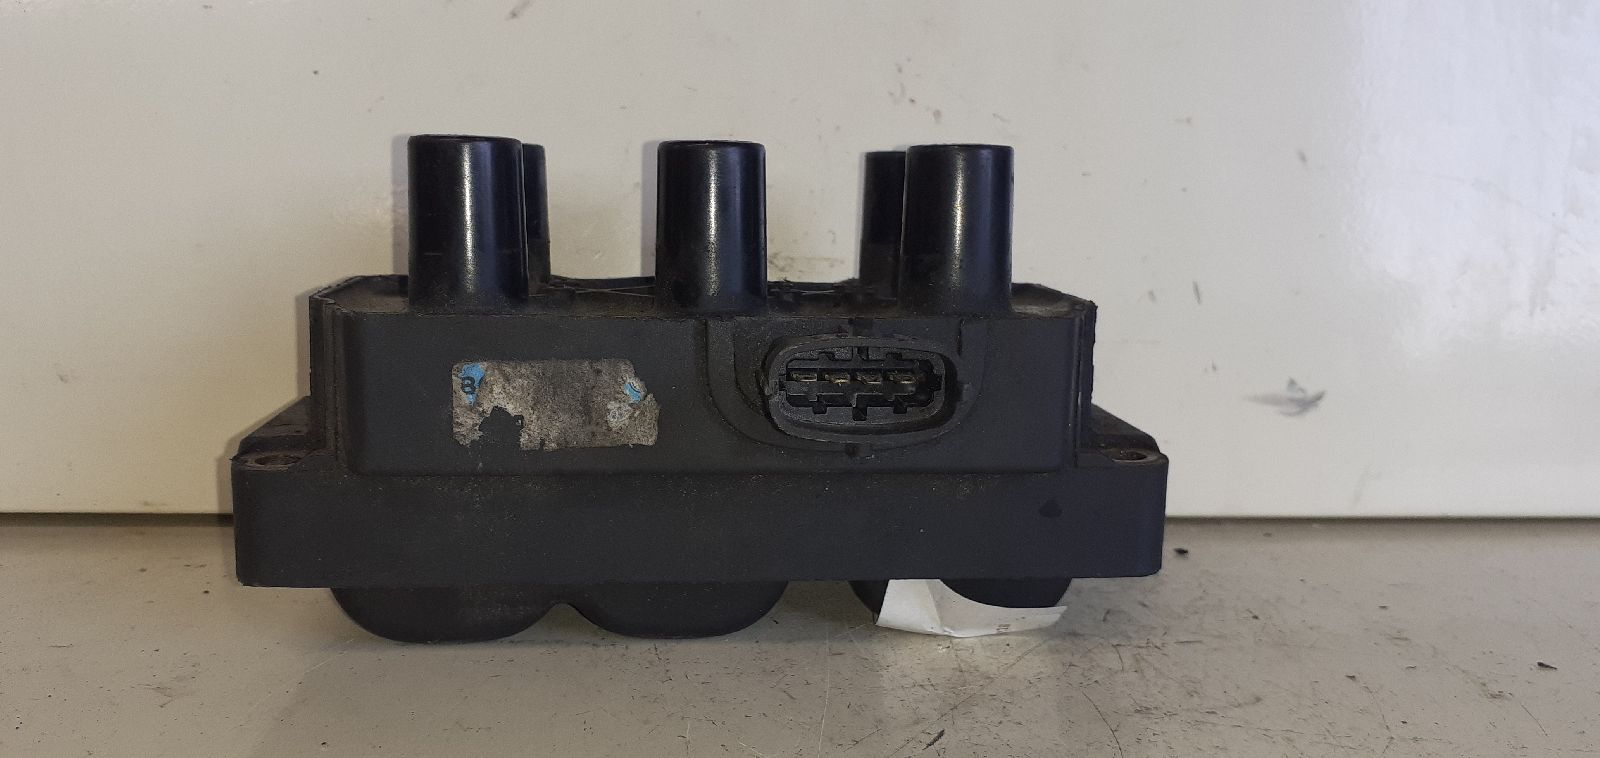 OPEL Sintra 1 generation (1996-1999) High Voltage Ignition Coil 0221503021 25281018